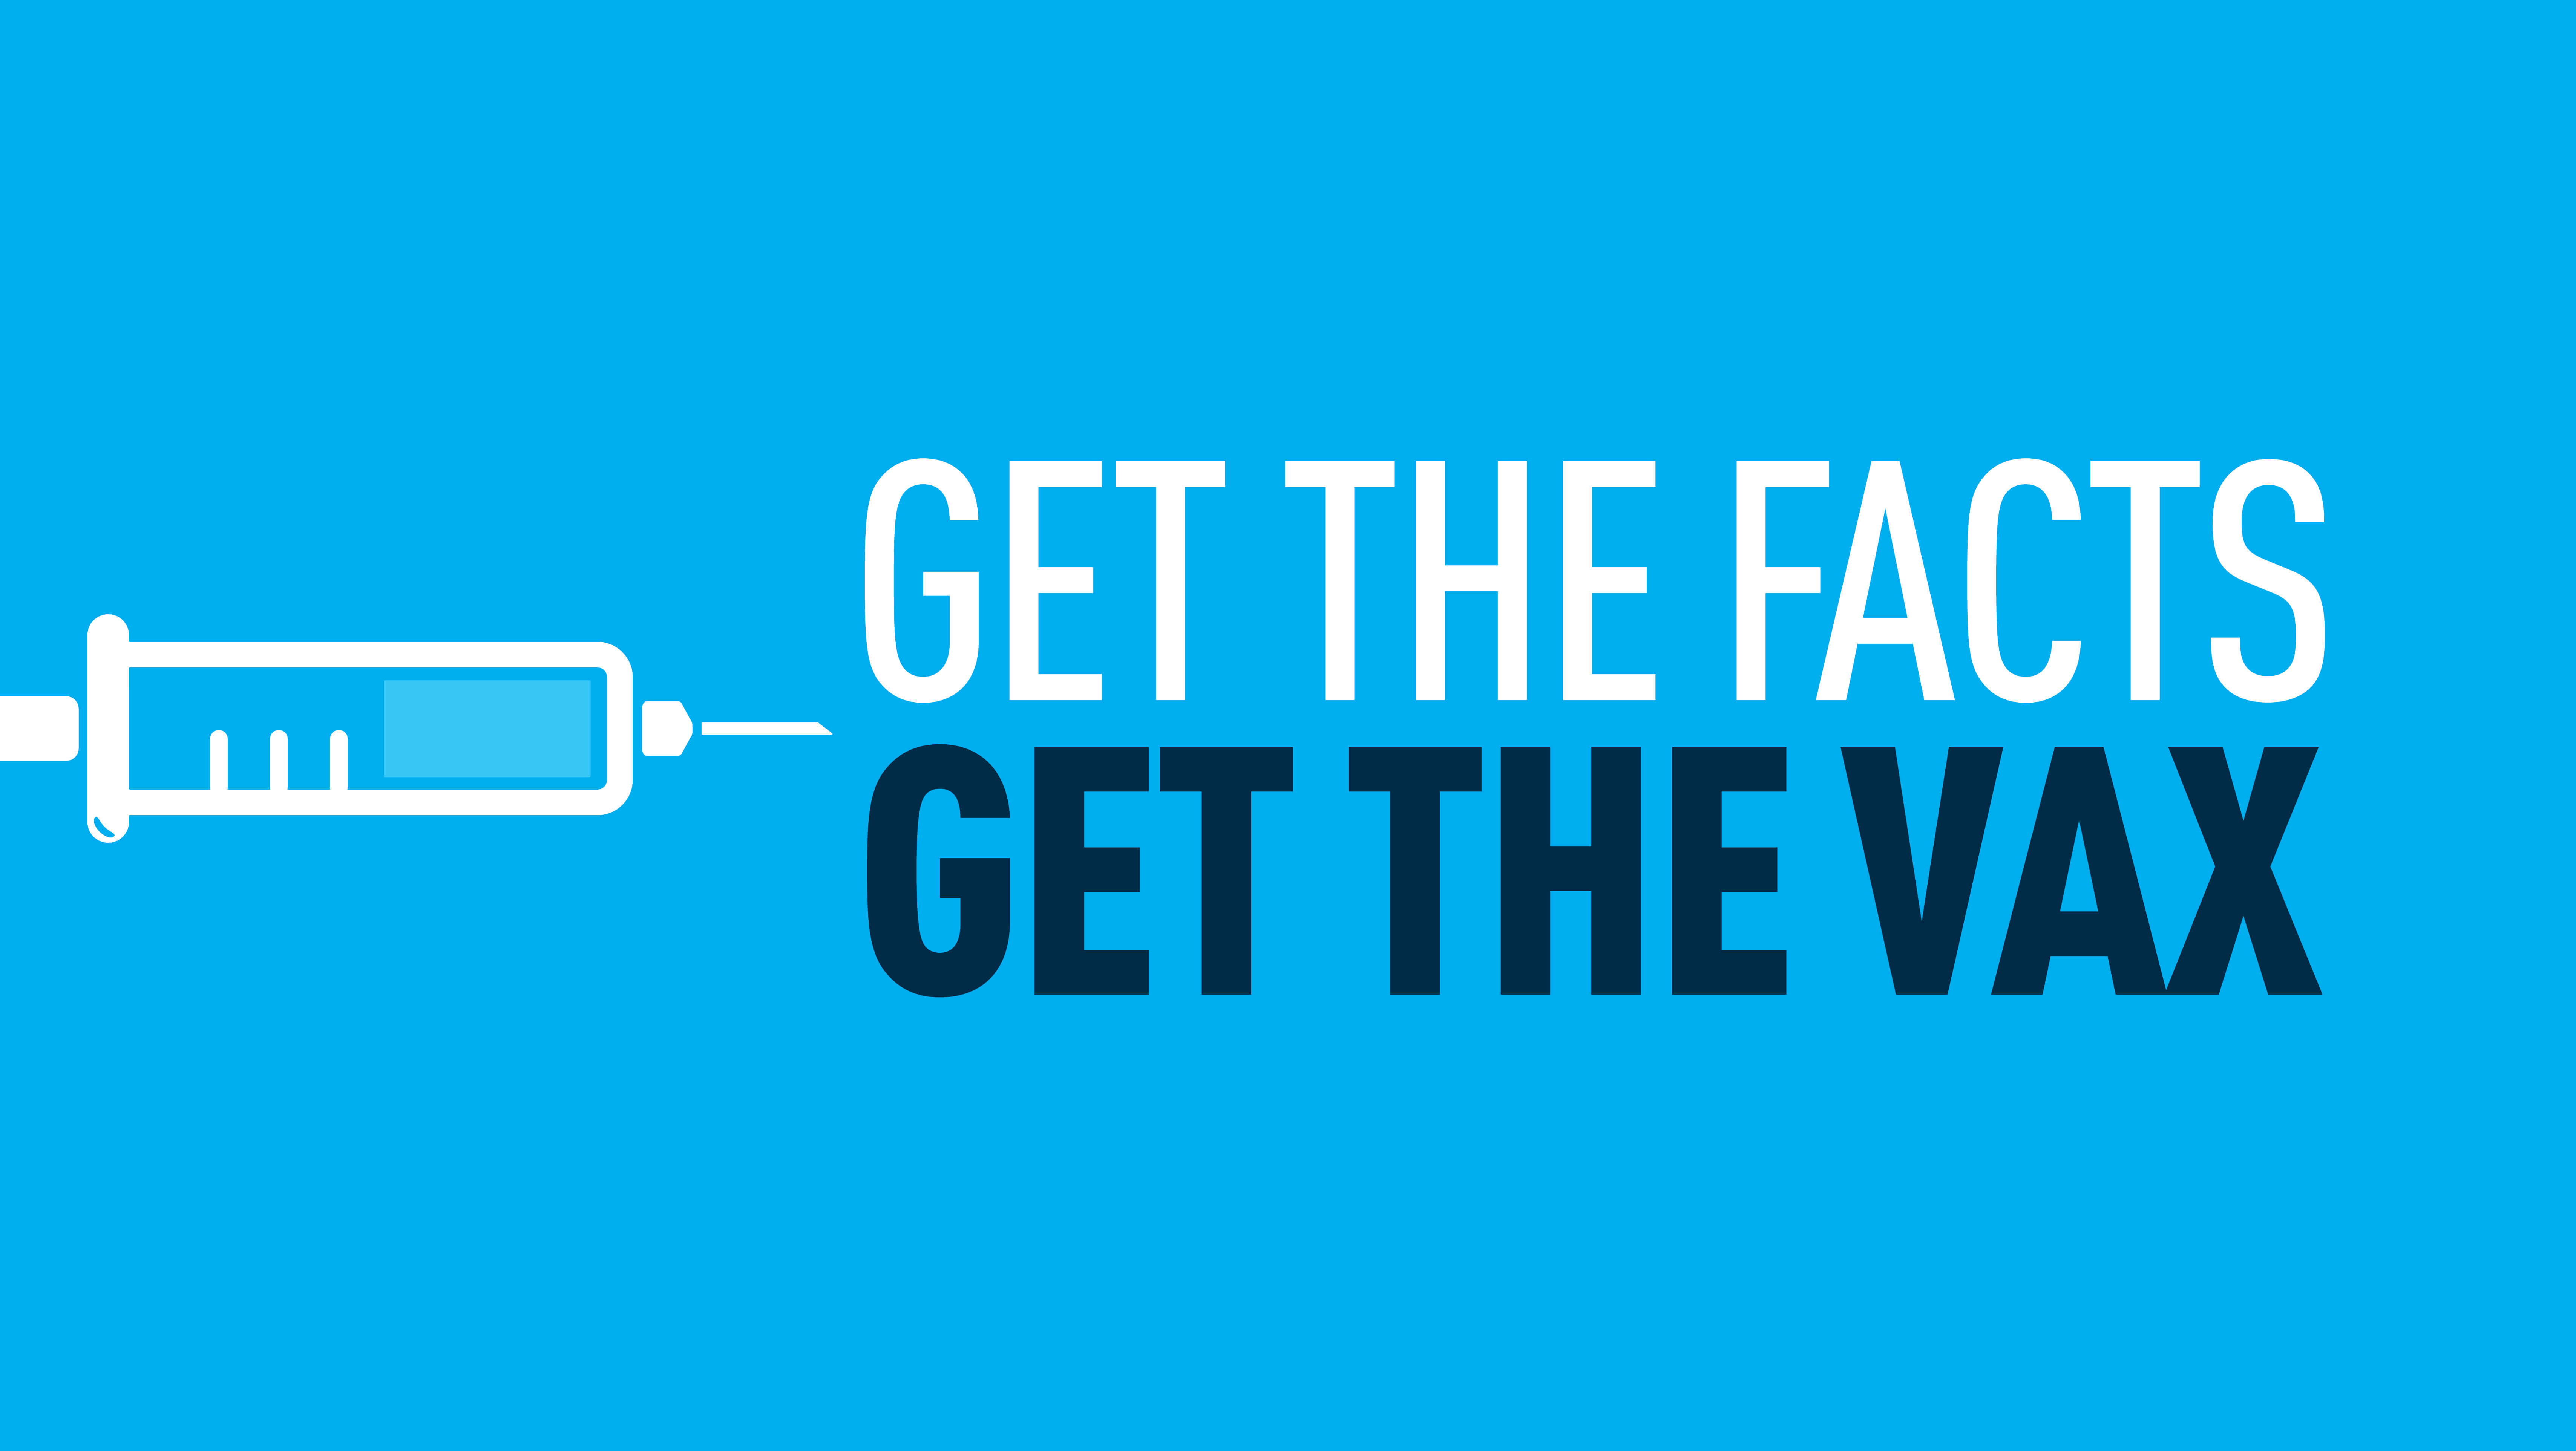 Image reads: "Get the Facts, Get The Vax."